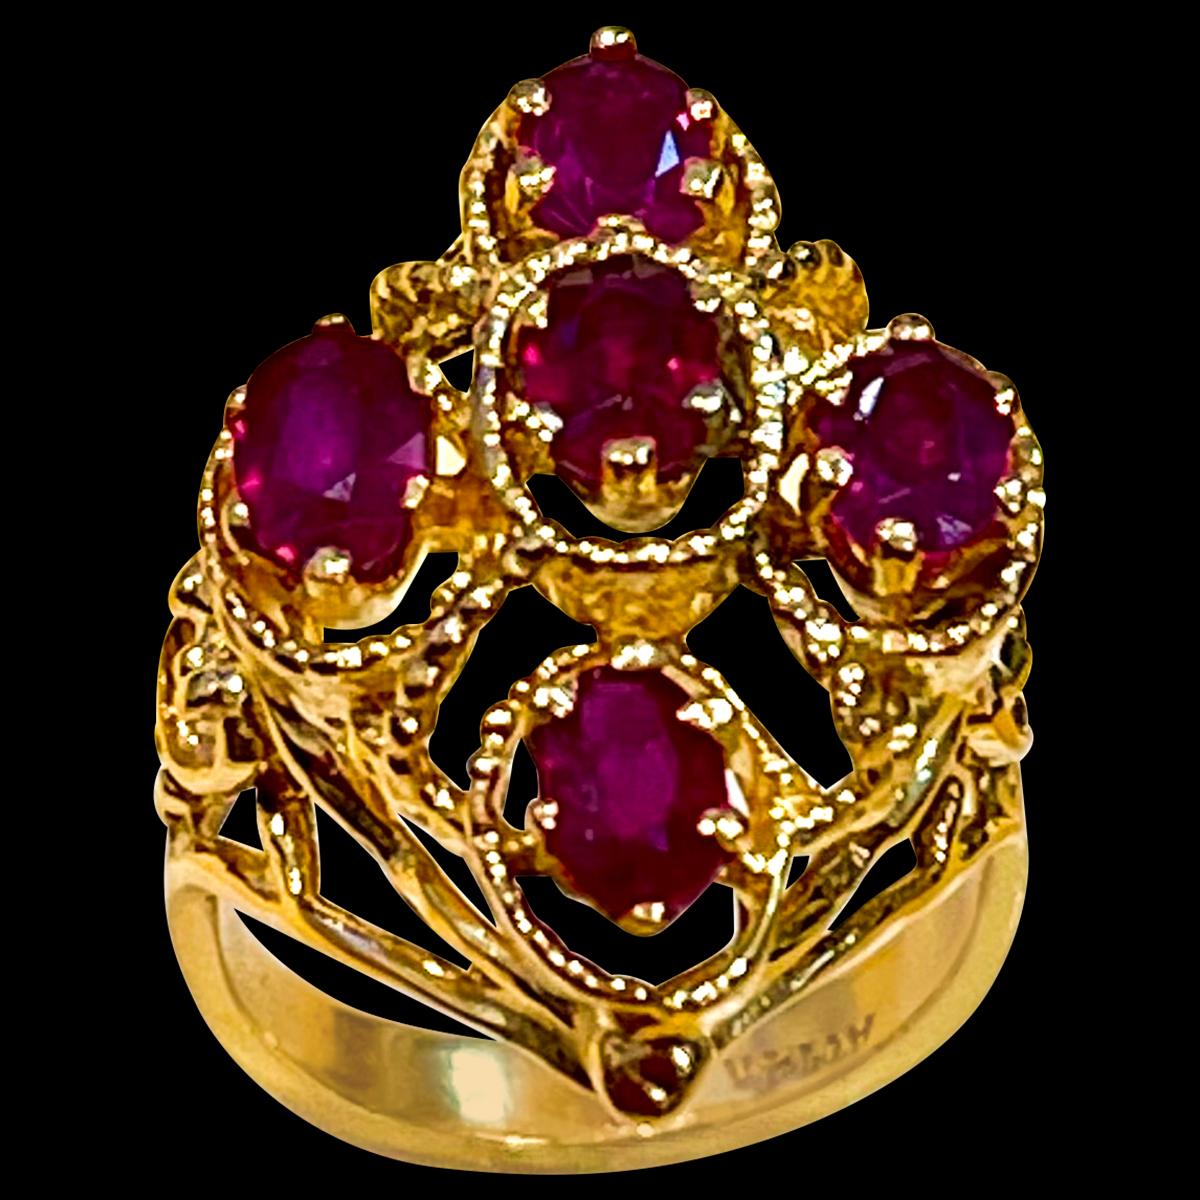 Oval Cut Treated Rubies 5 Ct 14 Karat Yellow Gold Flower Cocktail Ring, Size 6
Theses rubies are treated
 prong set
14 Karat Yellow Gold: 8.5  gram
Ring Size 6 ( can be altered for no charge )
Simple ring for the people  who don't like bling of